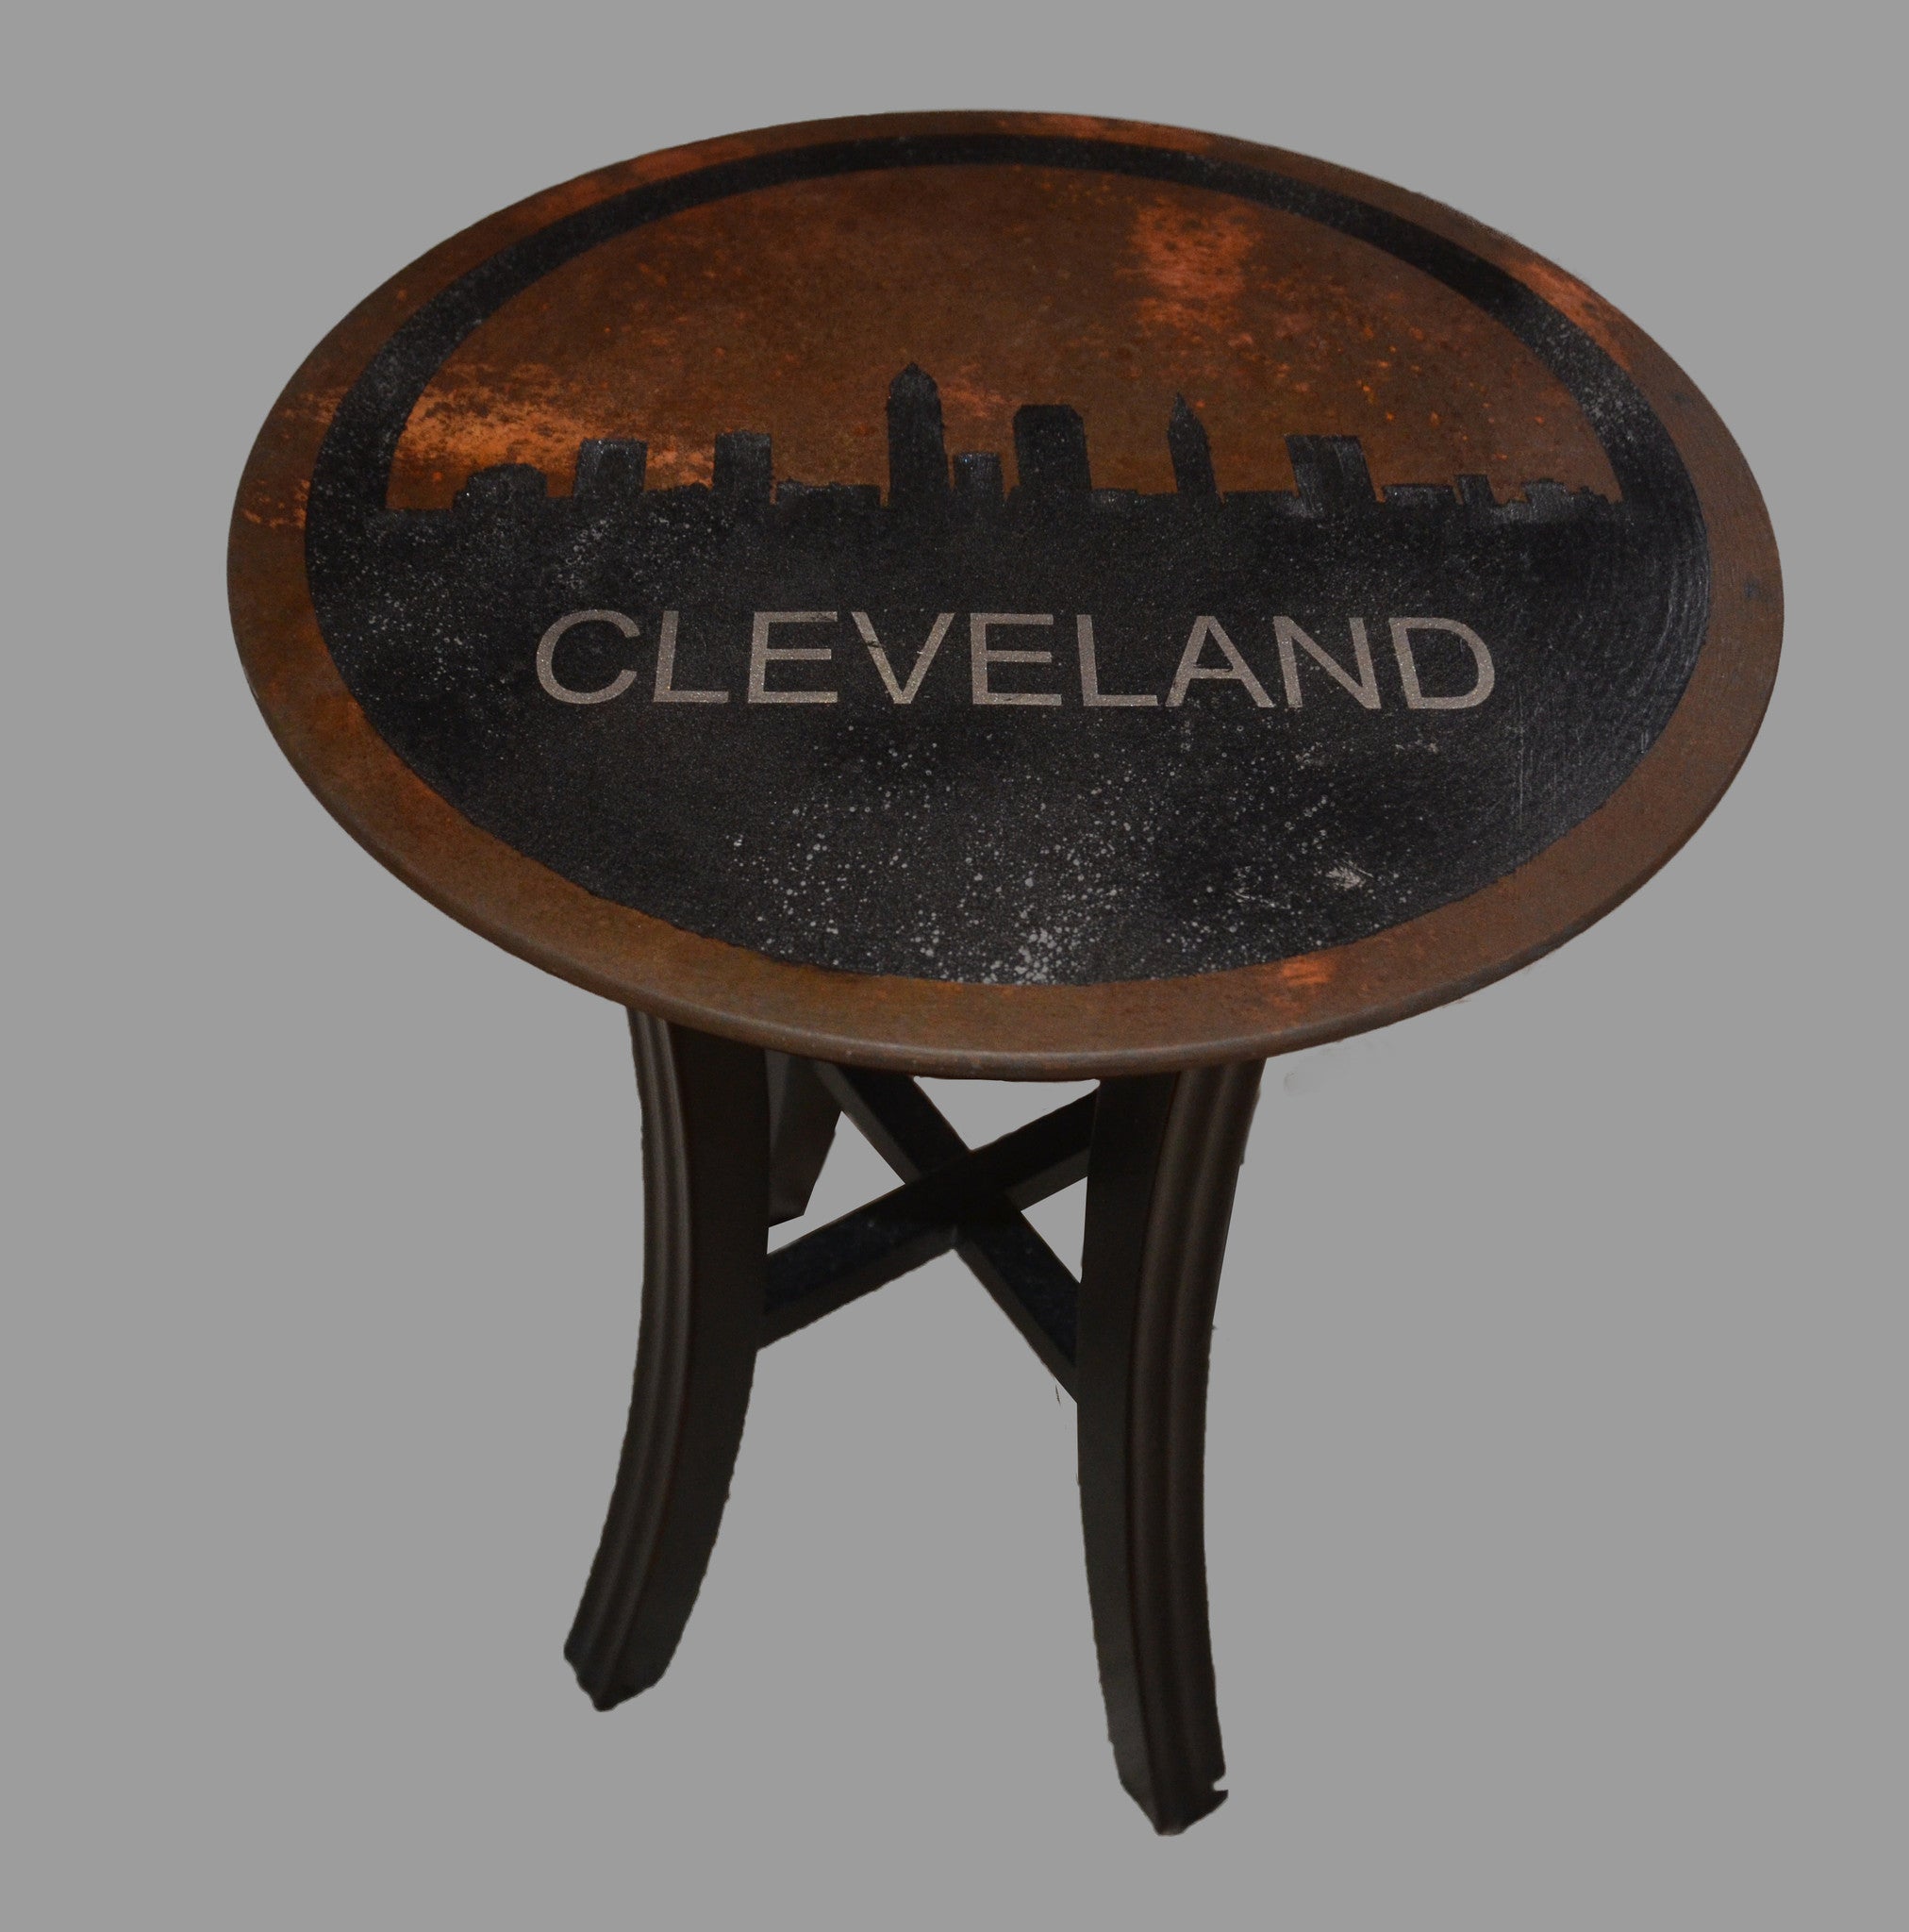 Cleveland Accent Table - Shirley's Loft - 3